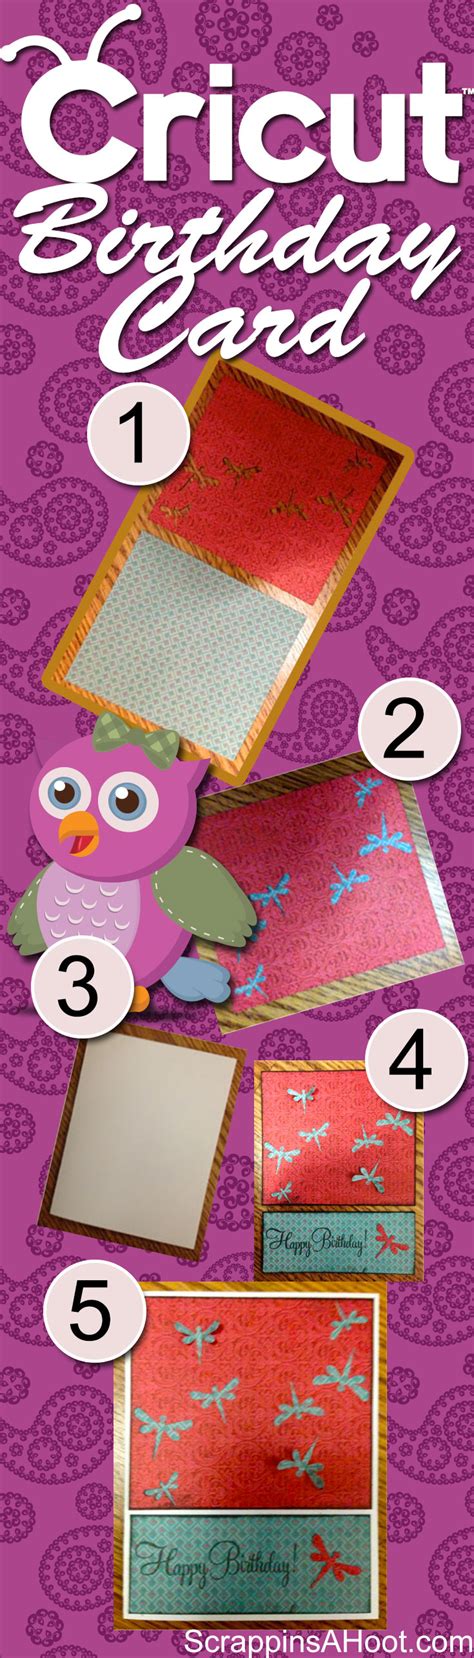 Feb 28, 2020 · to make cards on the cricut joy, you really just need the cricut joy machine, the cricut joy card mat, and some cardstock. How To Make a Homemade Scrapbook Birthday Card Using the Cricut Explore and Art Philosophy ...